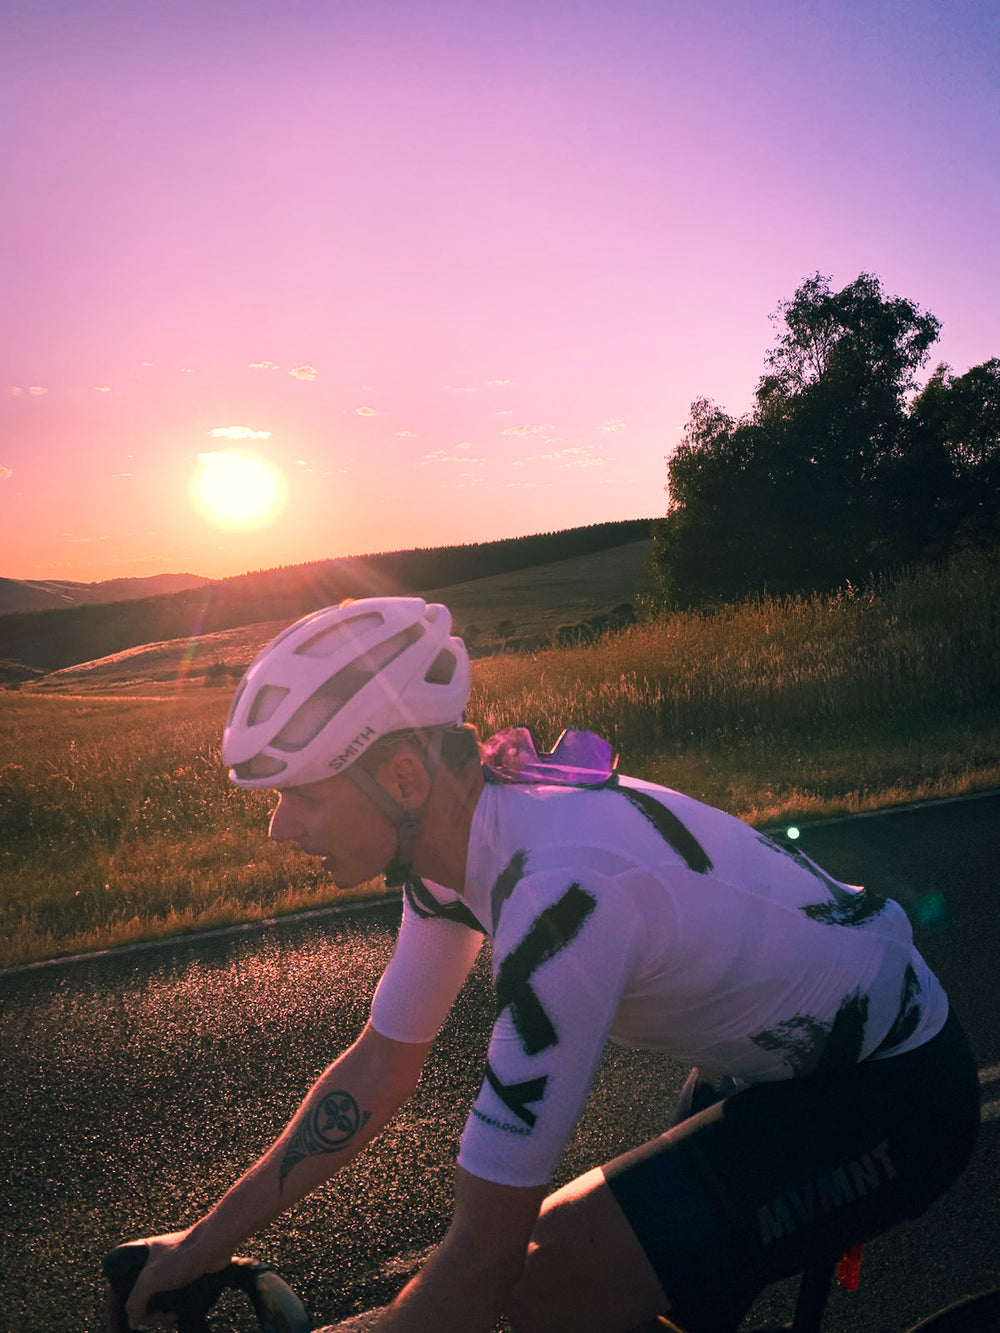 A male cyclist wearing sustainable, premium Aero-Fit cycling clothing rides through the hills of Canberra, his posture embodying power and endurance. The clothing is designed to improve performance and reduce environmental impact, while being perfect for the cycling conditions in Canberra